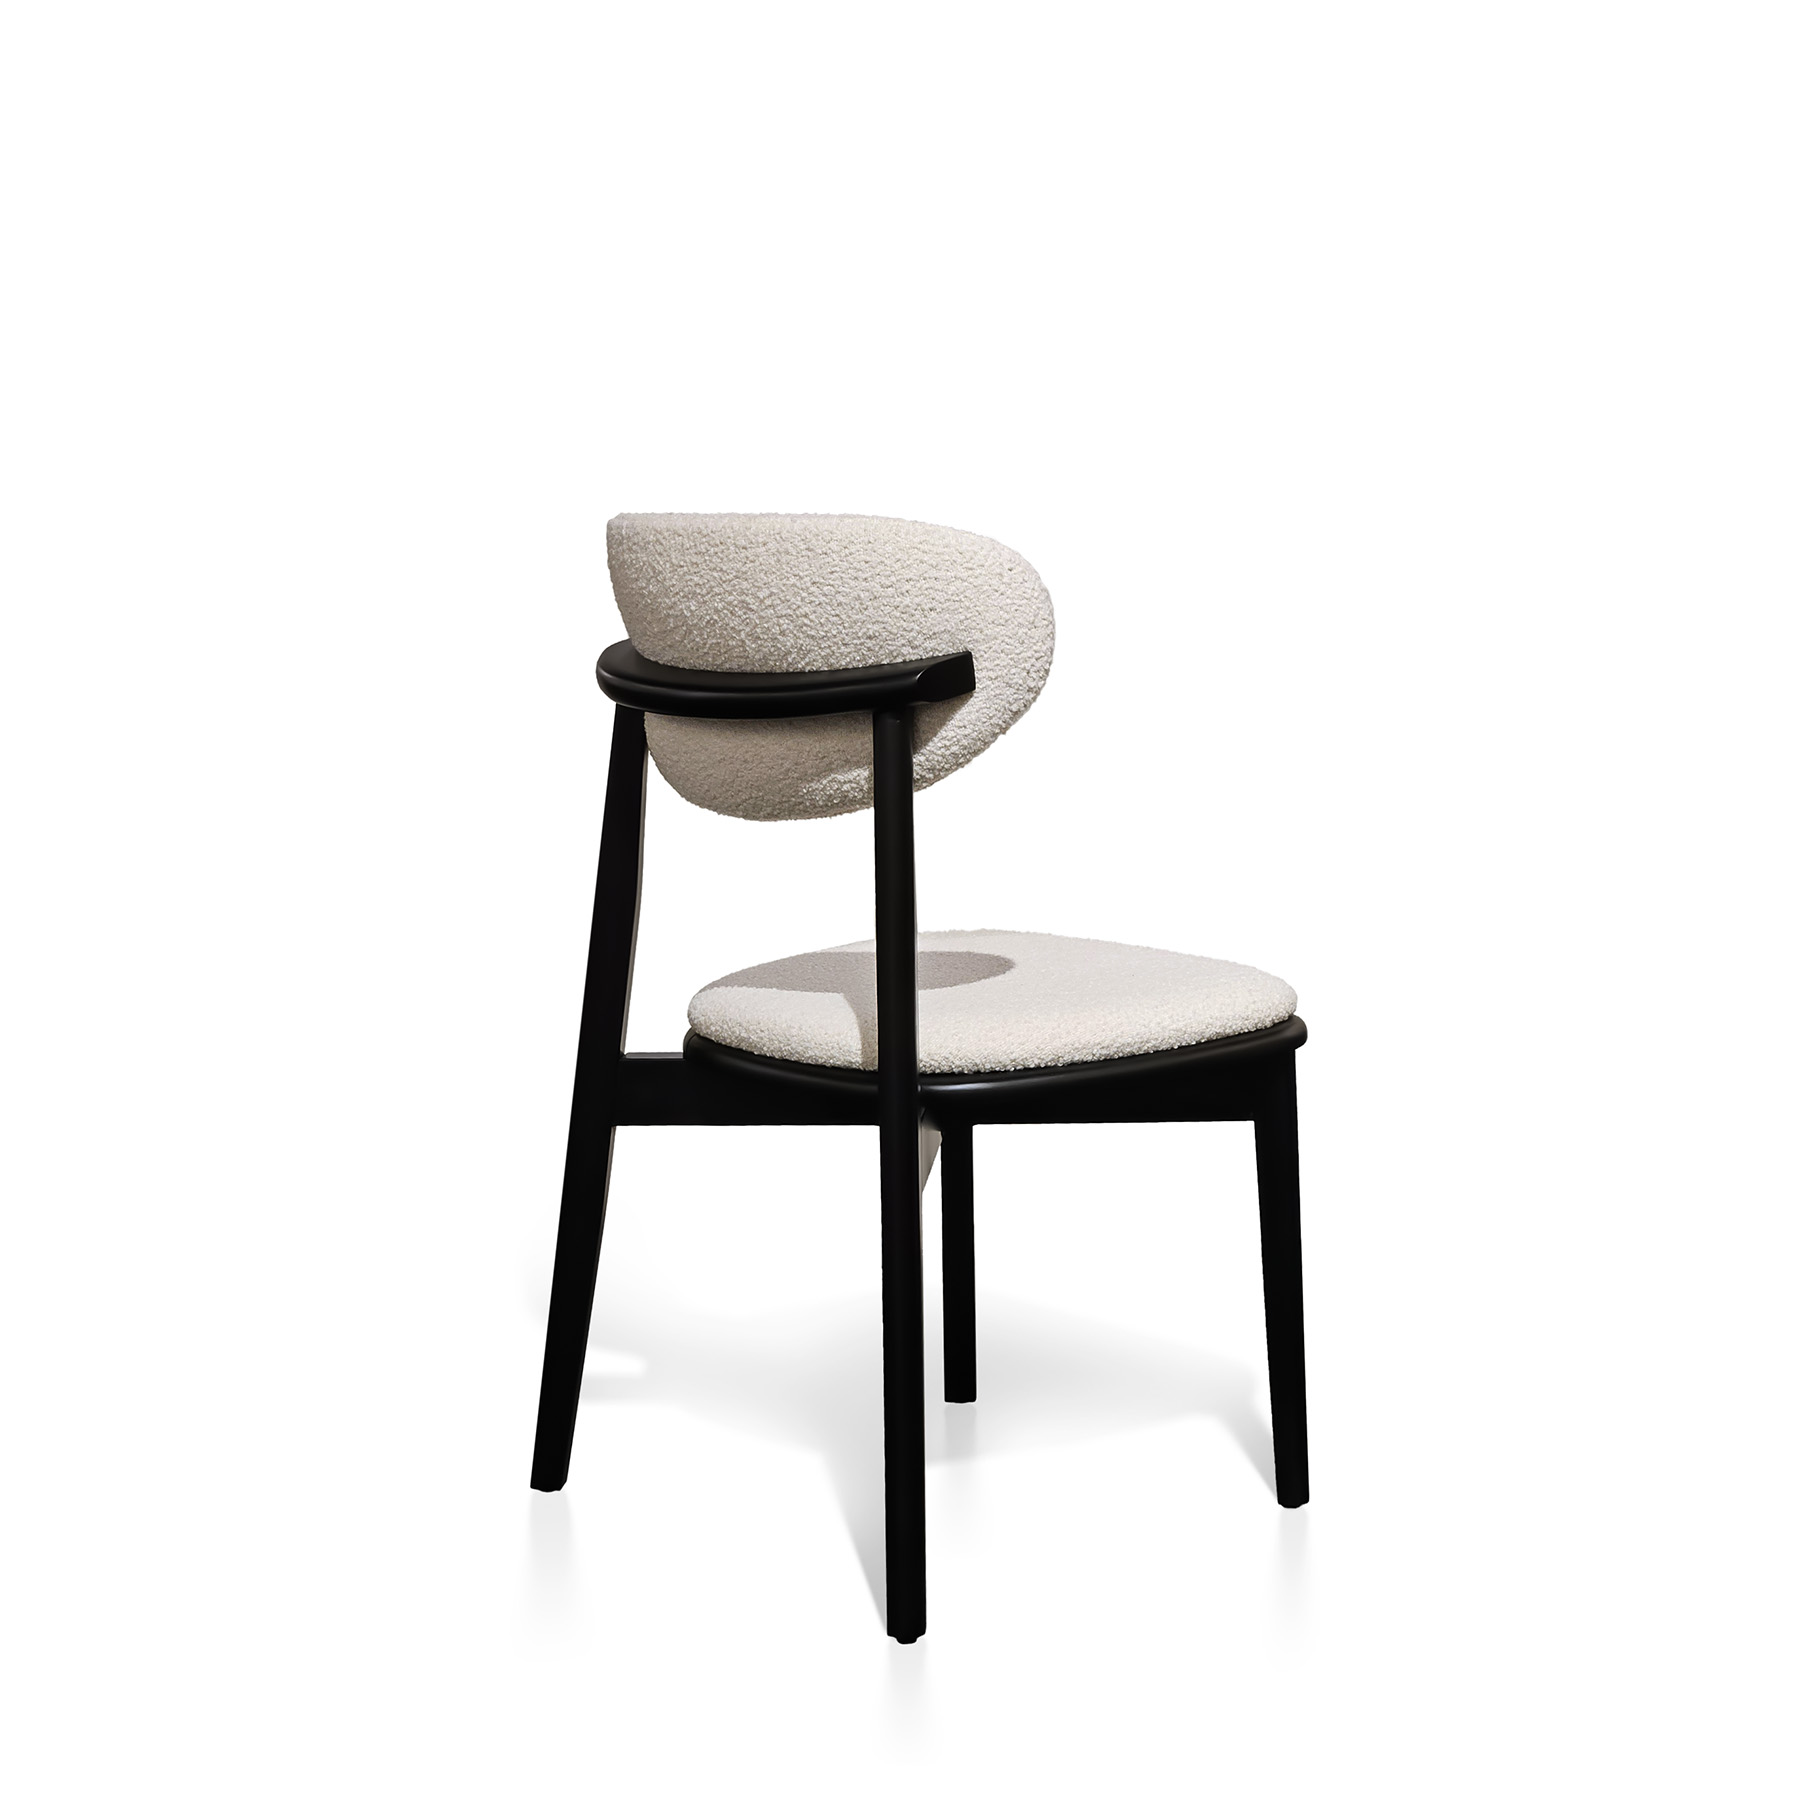 modern high end white dining chair with black wooden legs